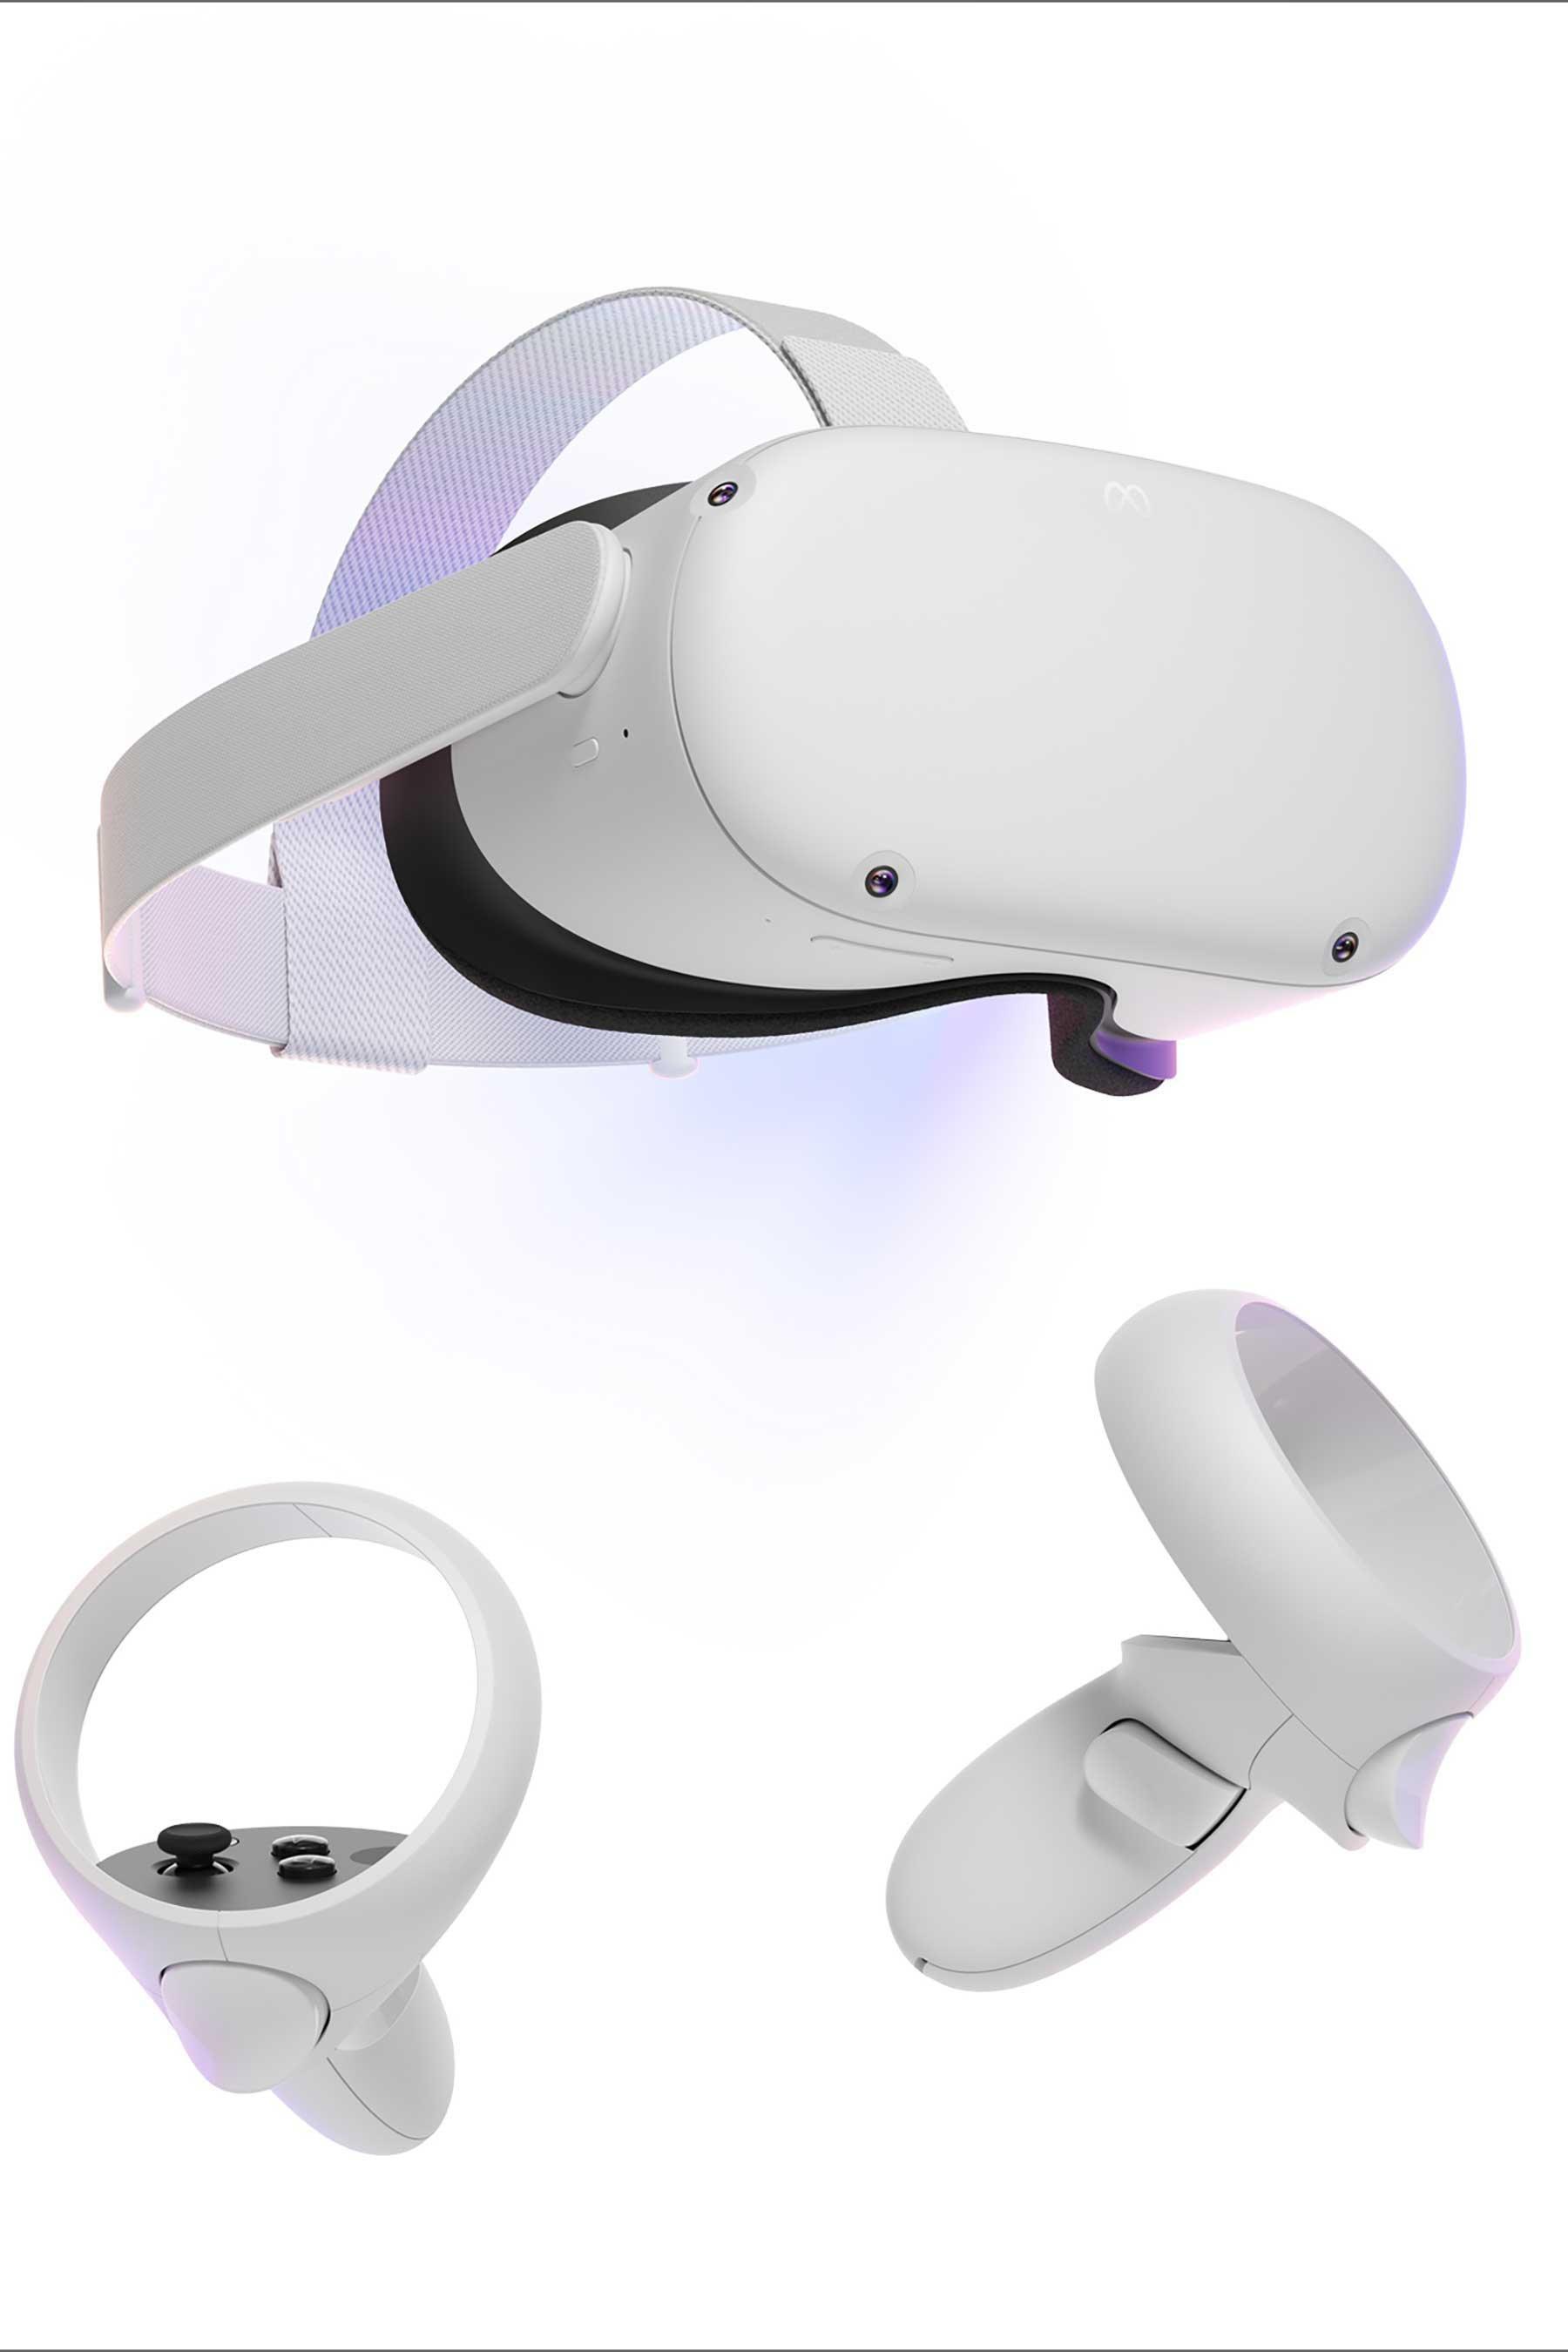 Meta Quest 2 128GB All-in-One VR Headset | Studio